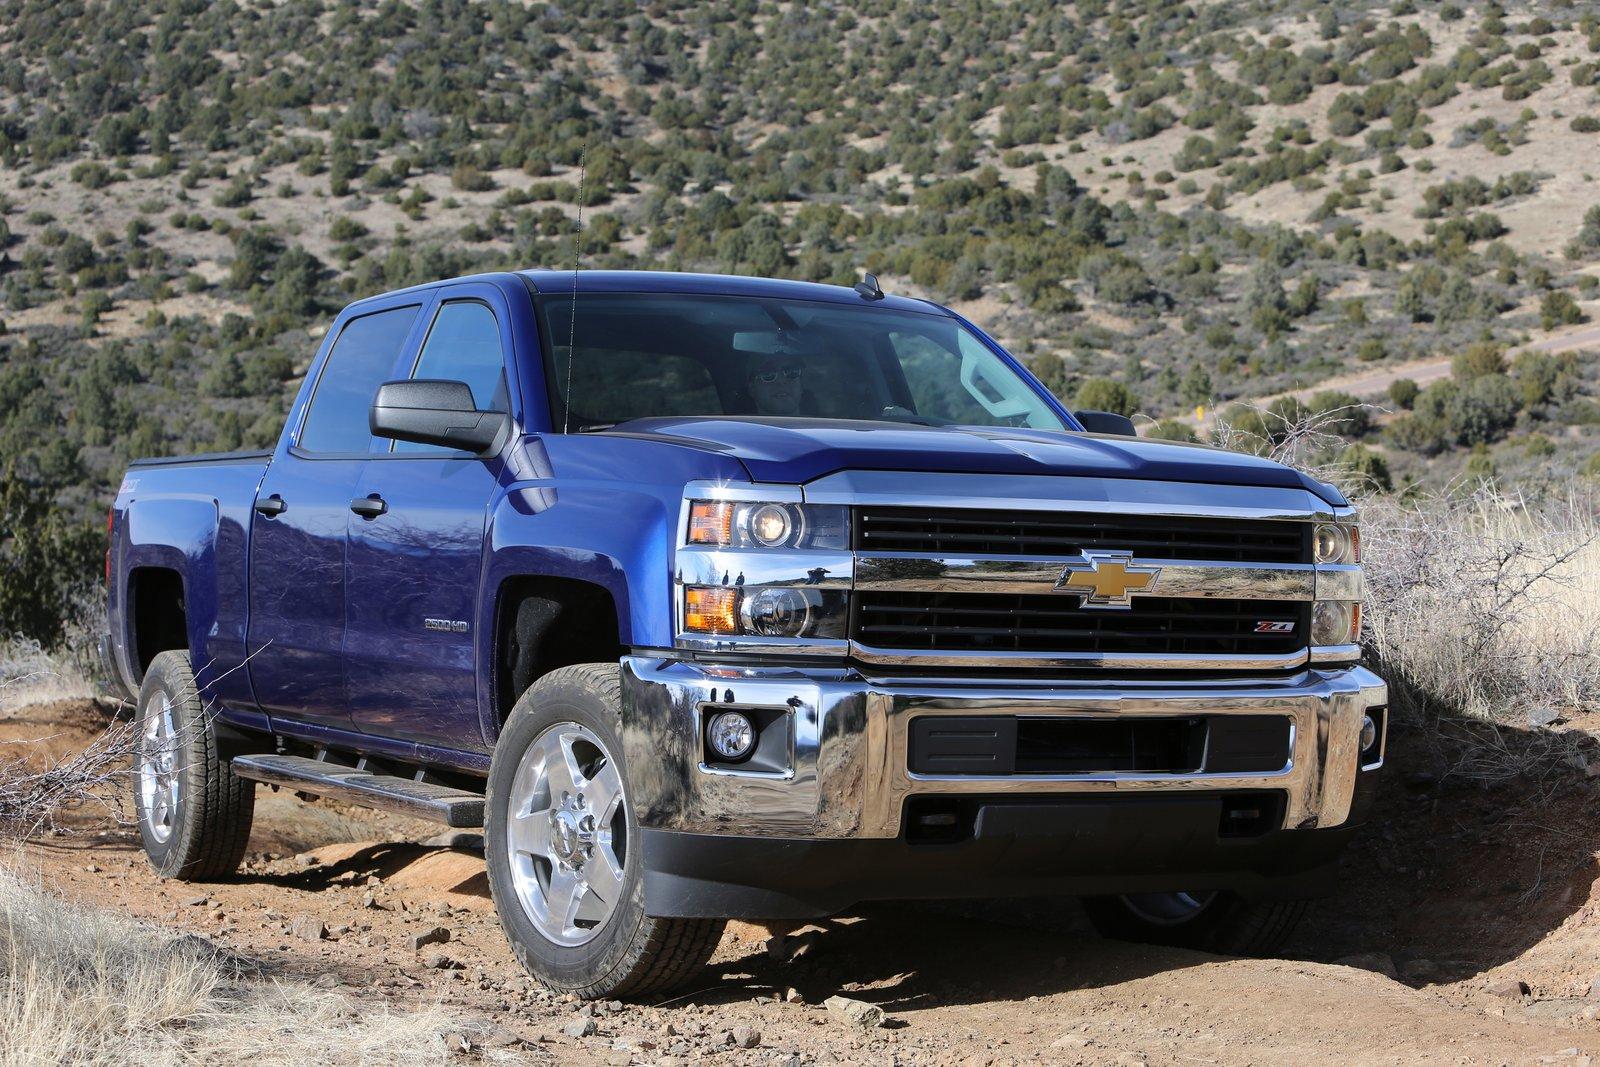 2016 Chevrolet Silverado HD is the New Face of Strong – Photo Gallery - autoevolution